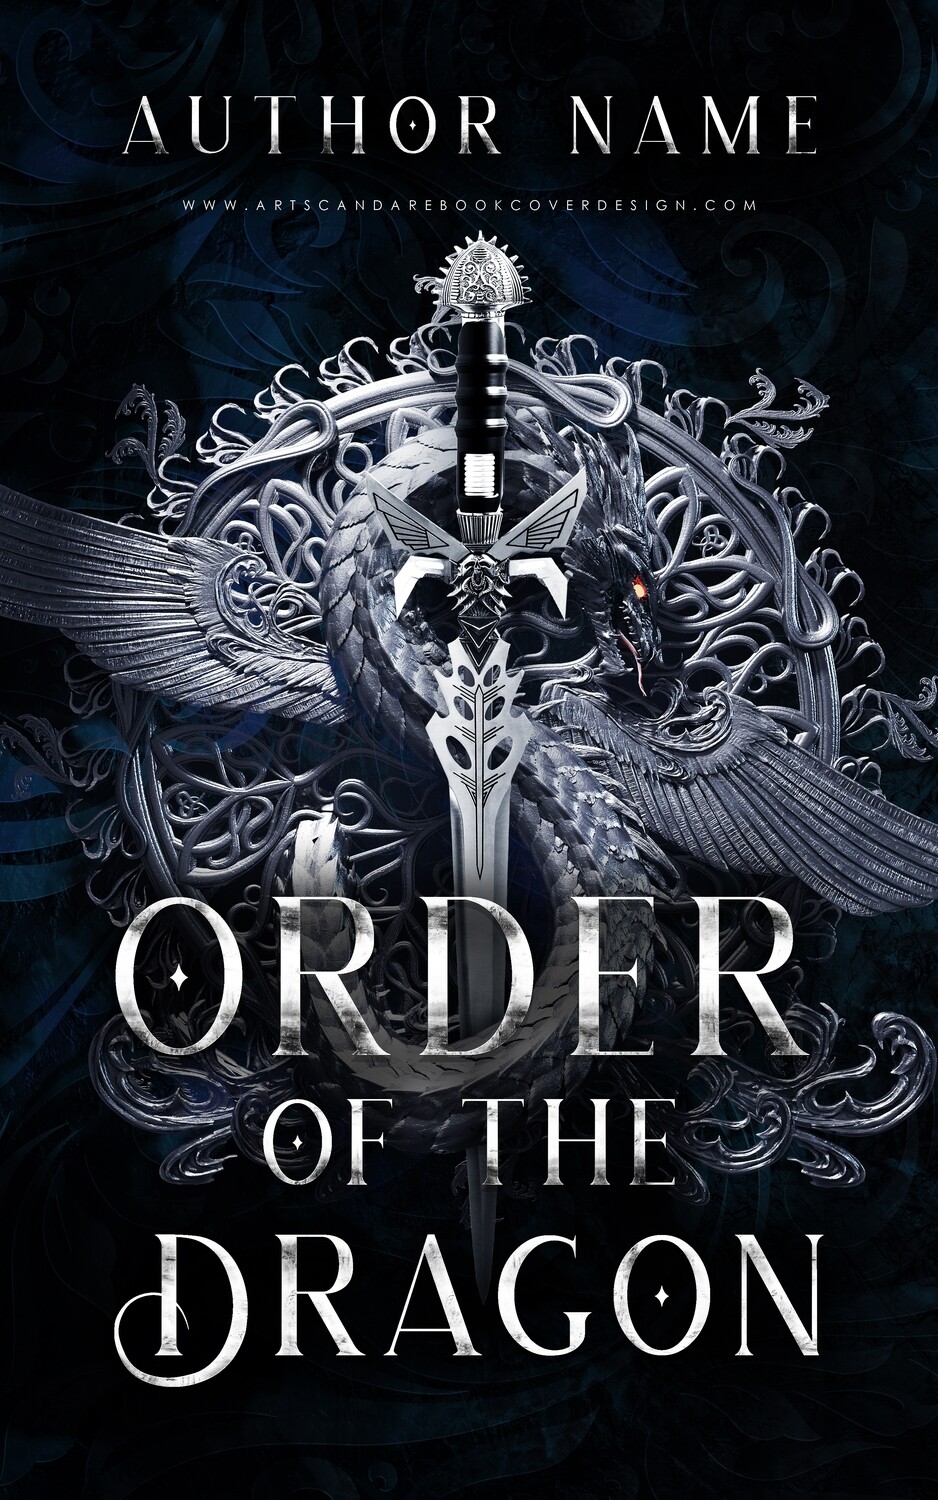 Ebook: Order of the Dragon